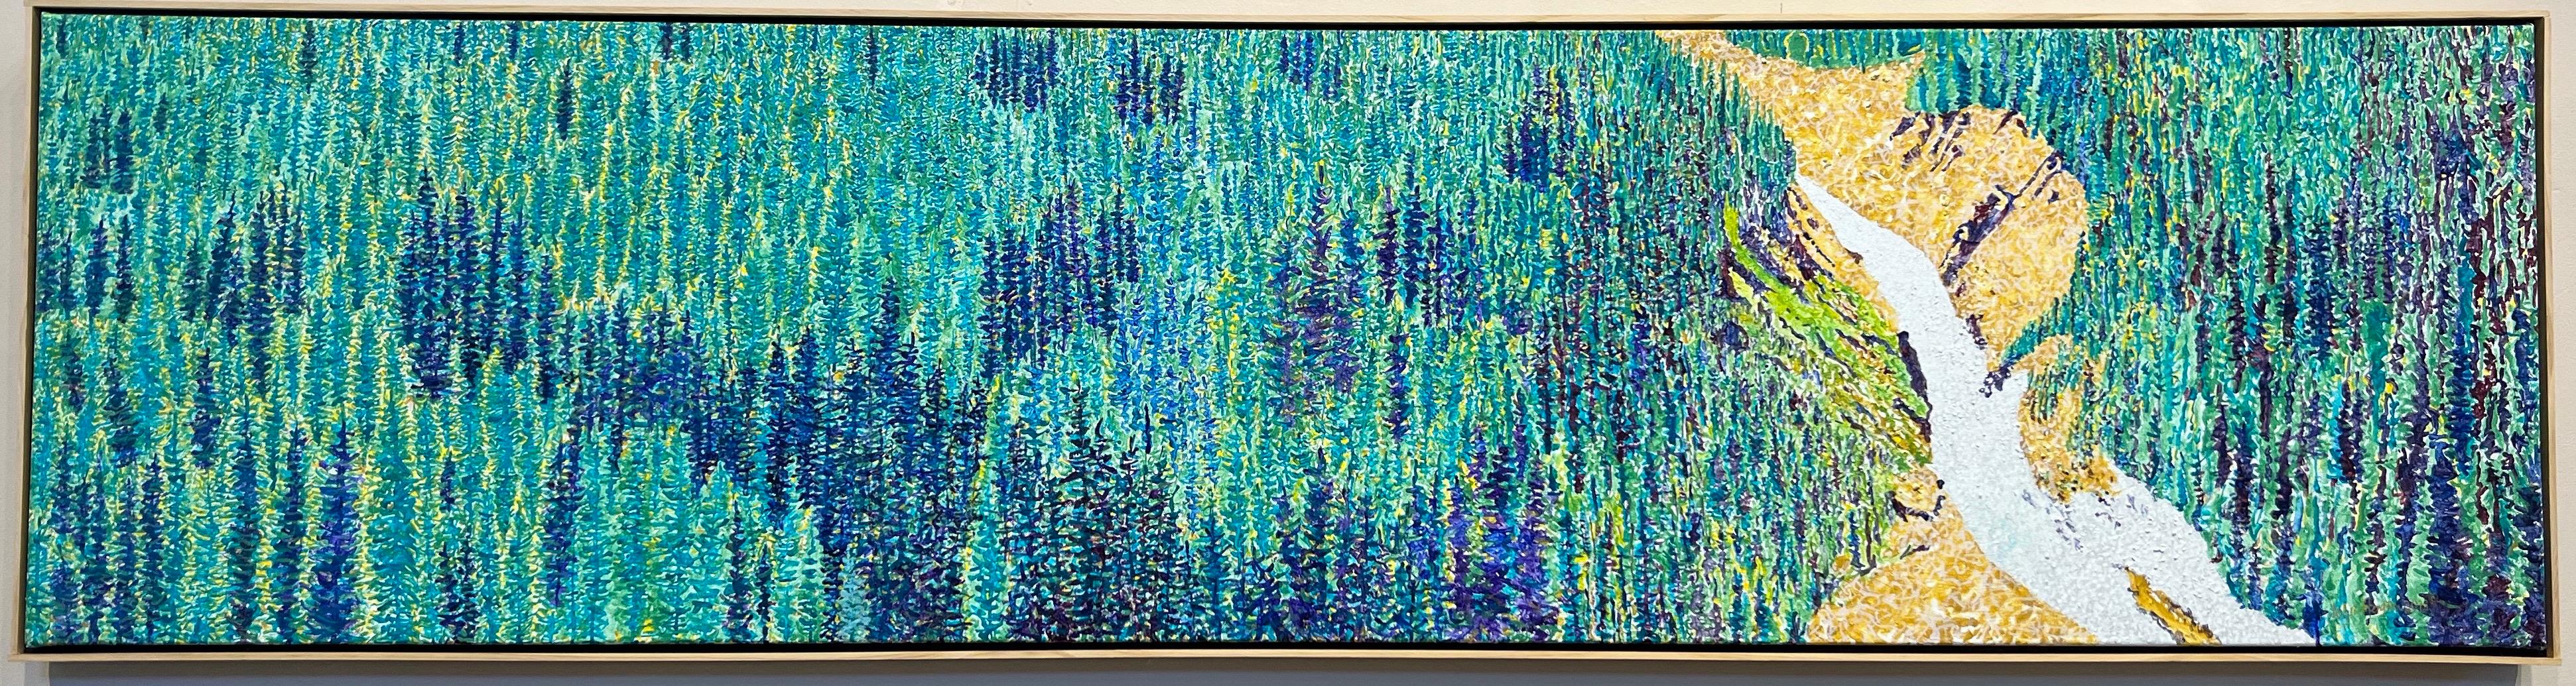 Forest and Mountain Stream, landscape, painting, by John Hogan, Santa Fe, blue

John Hogan A graduate of Northeast Louisiana State University with a bachelor's degree and New Mexico Highlands University with a Masters in Art Hogan studied with